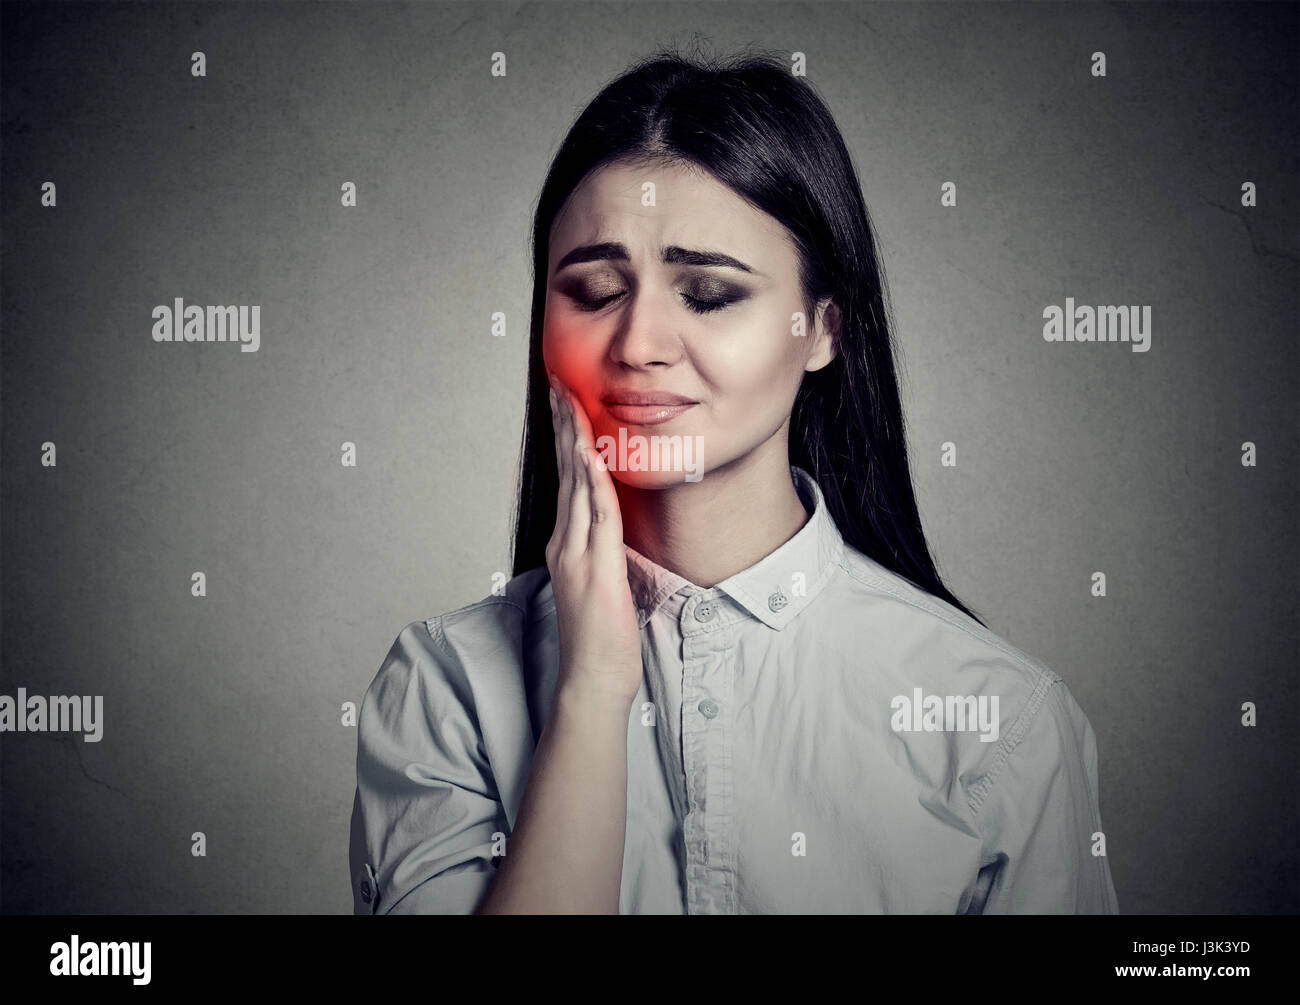 Woman with sensitive toothache crown problem suffering from pain touching outside mouth with hand isolated on gray background. Negative human emotion  Stock Photo